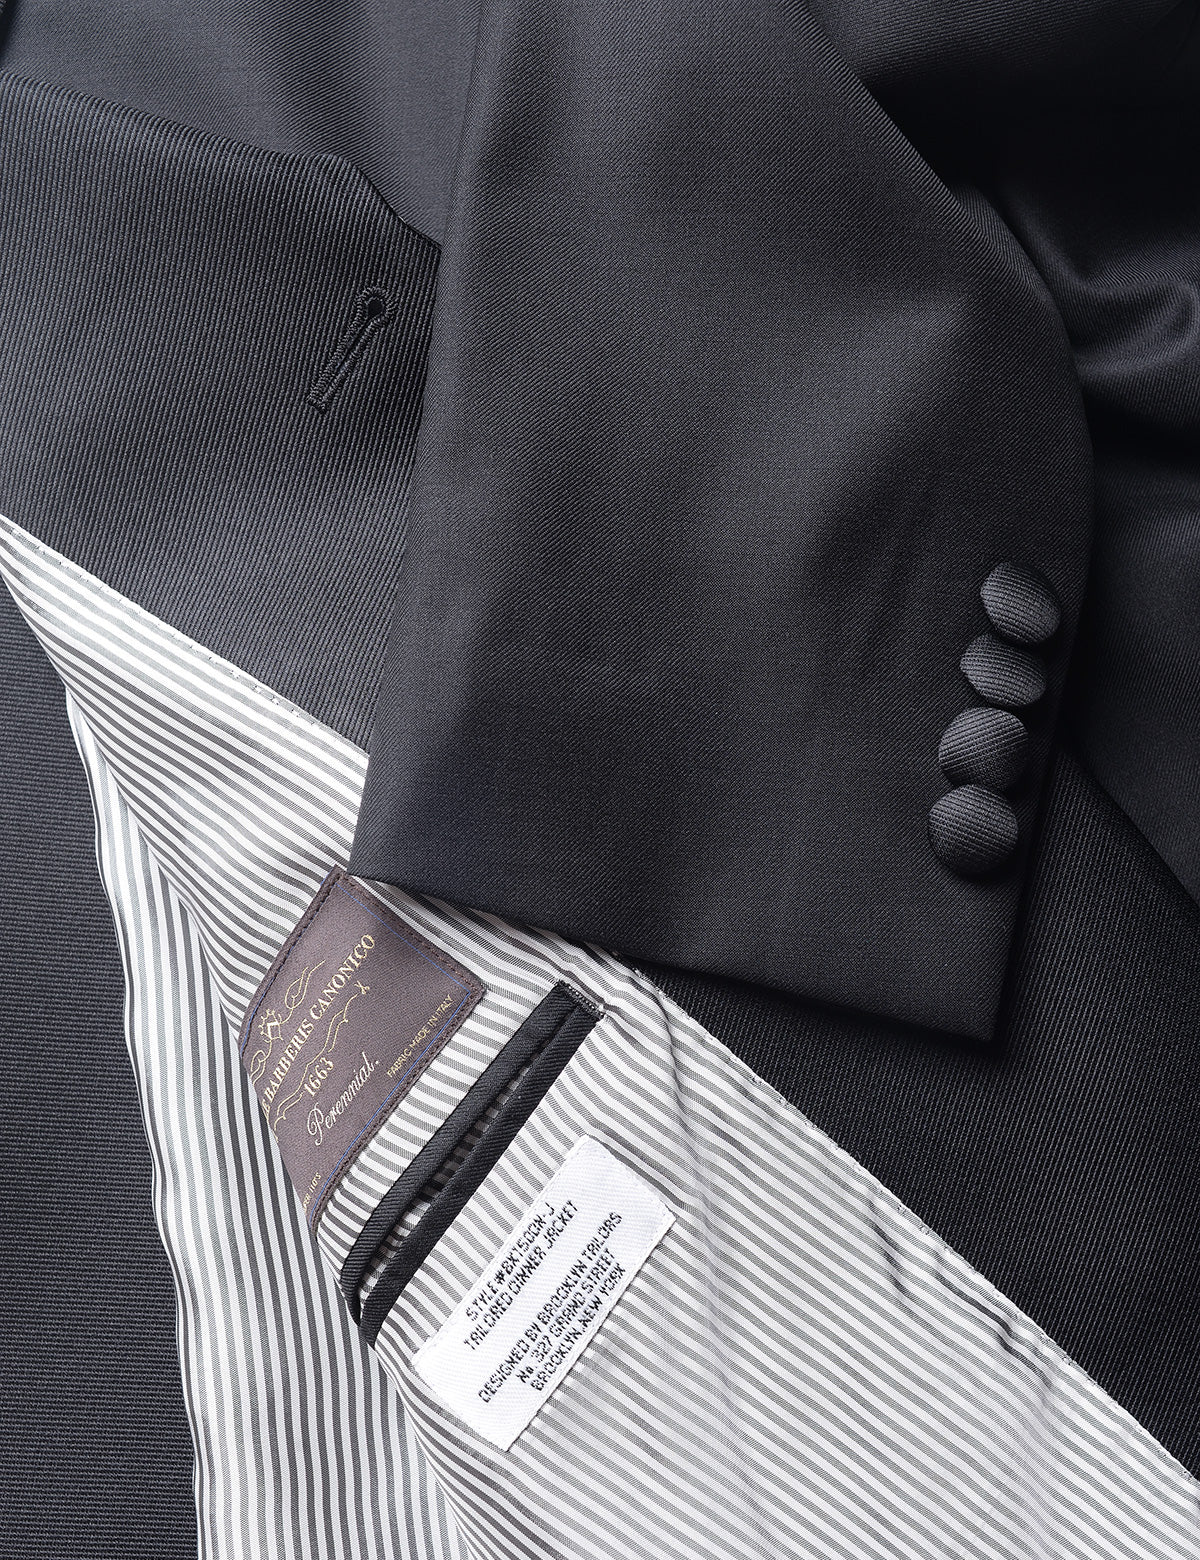 Detail shot of Brooklyn Tailors BKT50 Shawl Collar Tuxedo Jacket in Super 120s Twill - Black with Grosgrain Lapel showing cuff with covered buttons and lining